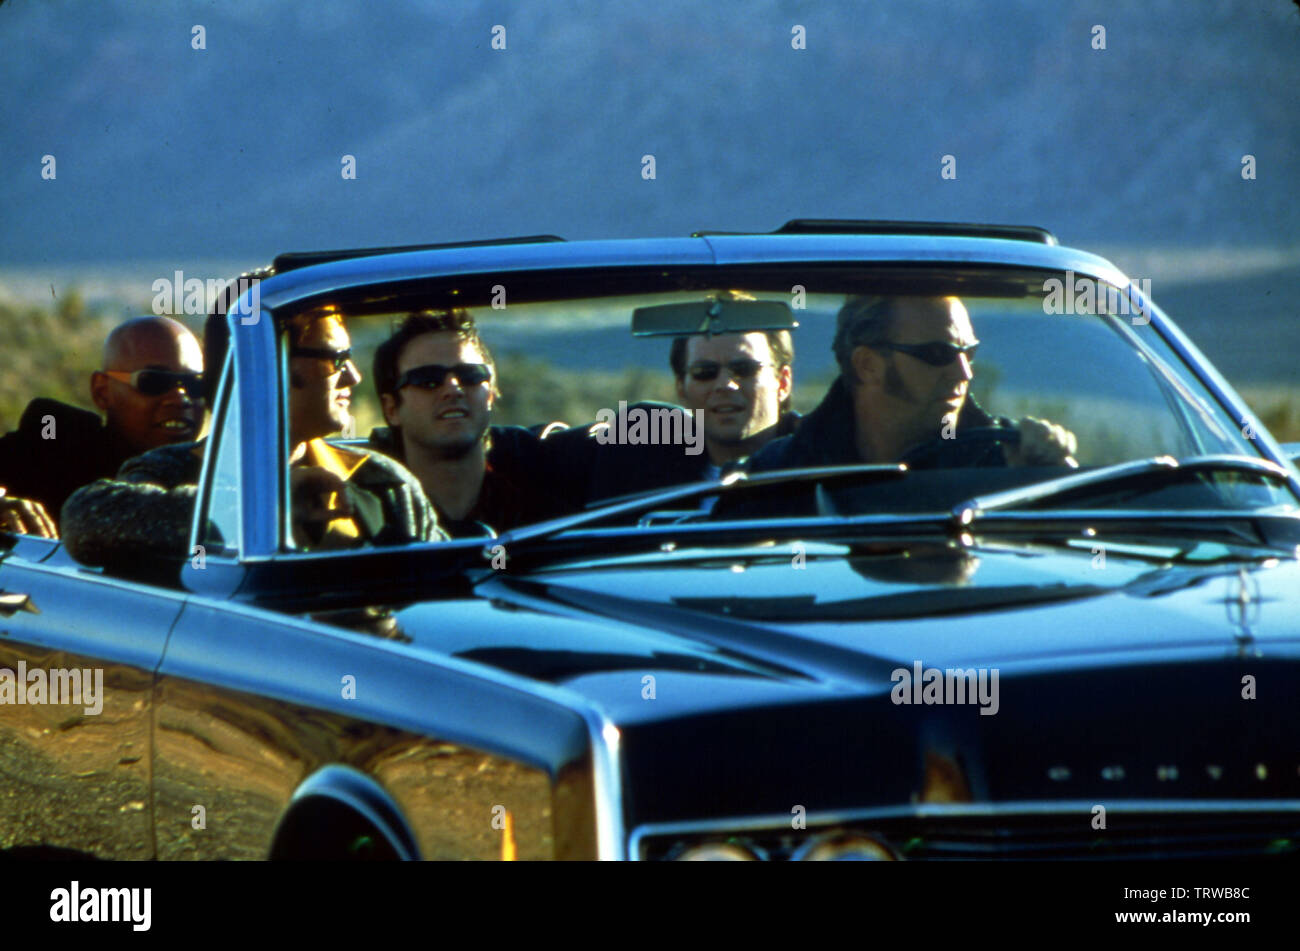 KURT RUSSELL , DAVID ARQUETTE , KEVIN COSTNER , CHRISTIAN SLATER and BOKEEM WOODBINE in 3000 MILES TO GRACELAND (2001). Copyright: Editorial use only. No merchandising or book covers. This is a publicly distributed handout. Access rights only, no license of copyright provided. Only to be reproduced in conjunction with promotion of this film. Credit: 3000MILES PROD/LIGHTONE ENT/FRANCHISE/MORGAN CREEK/WARNER / Album Stock Photo